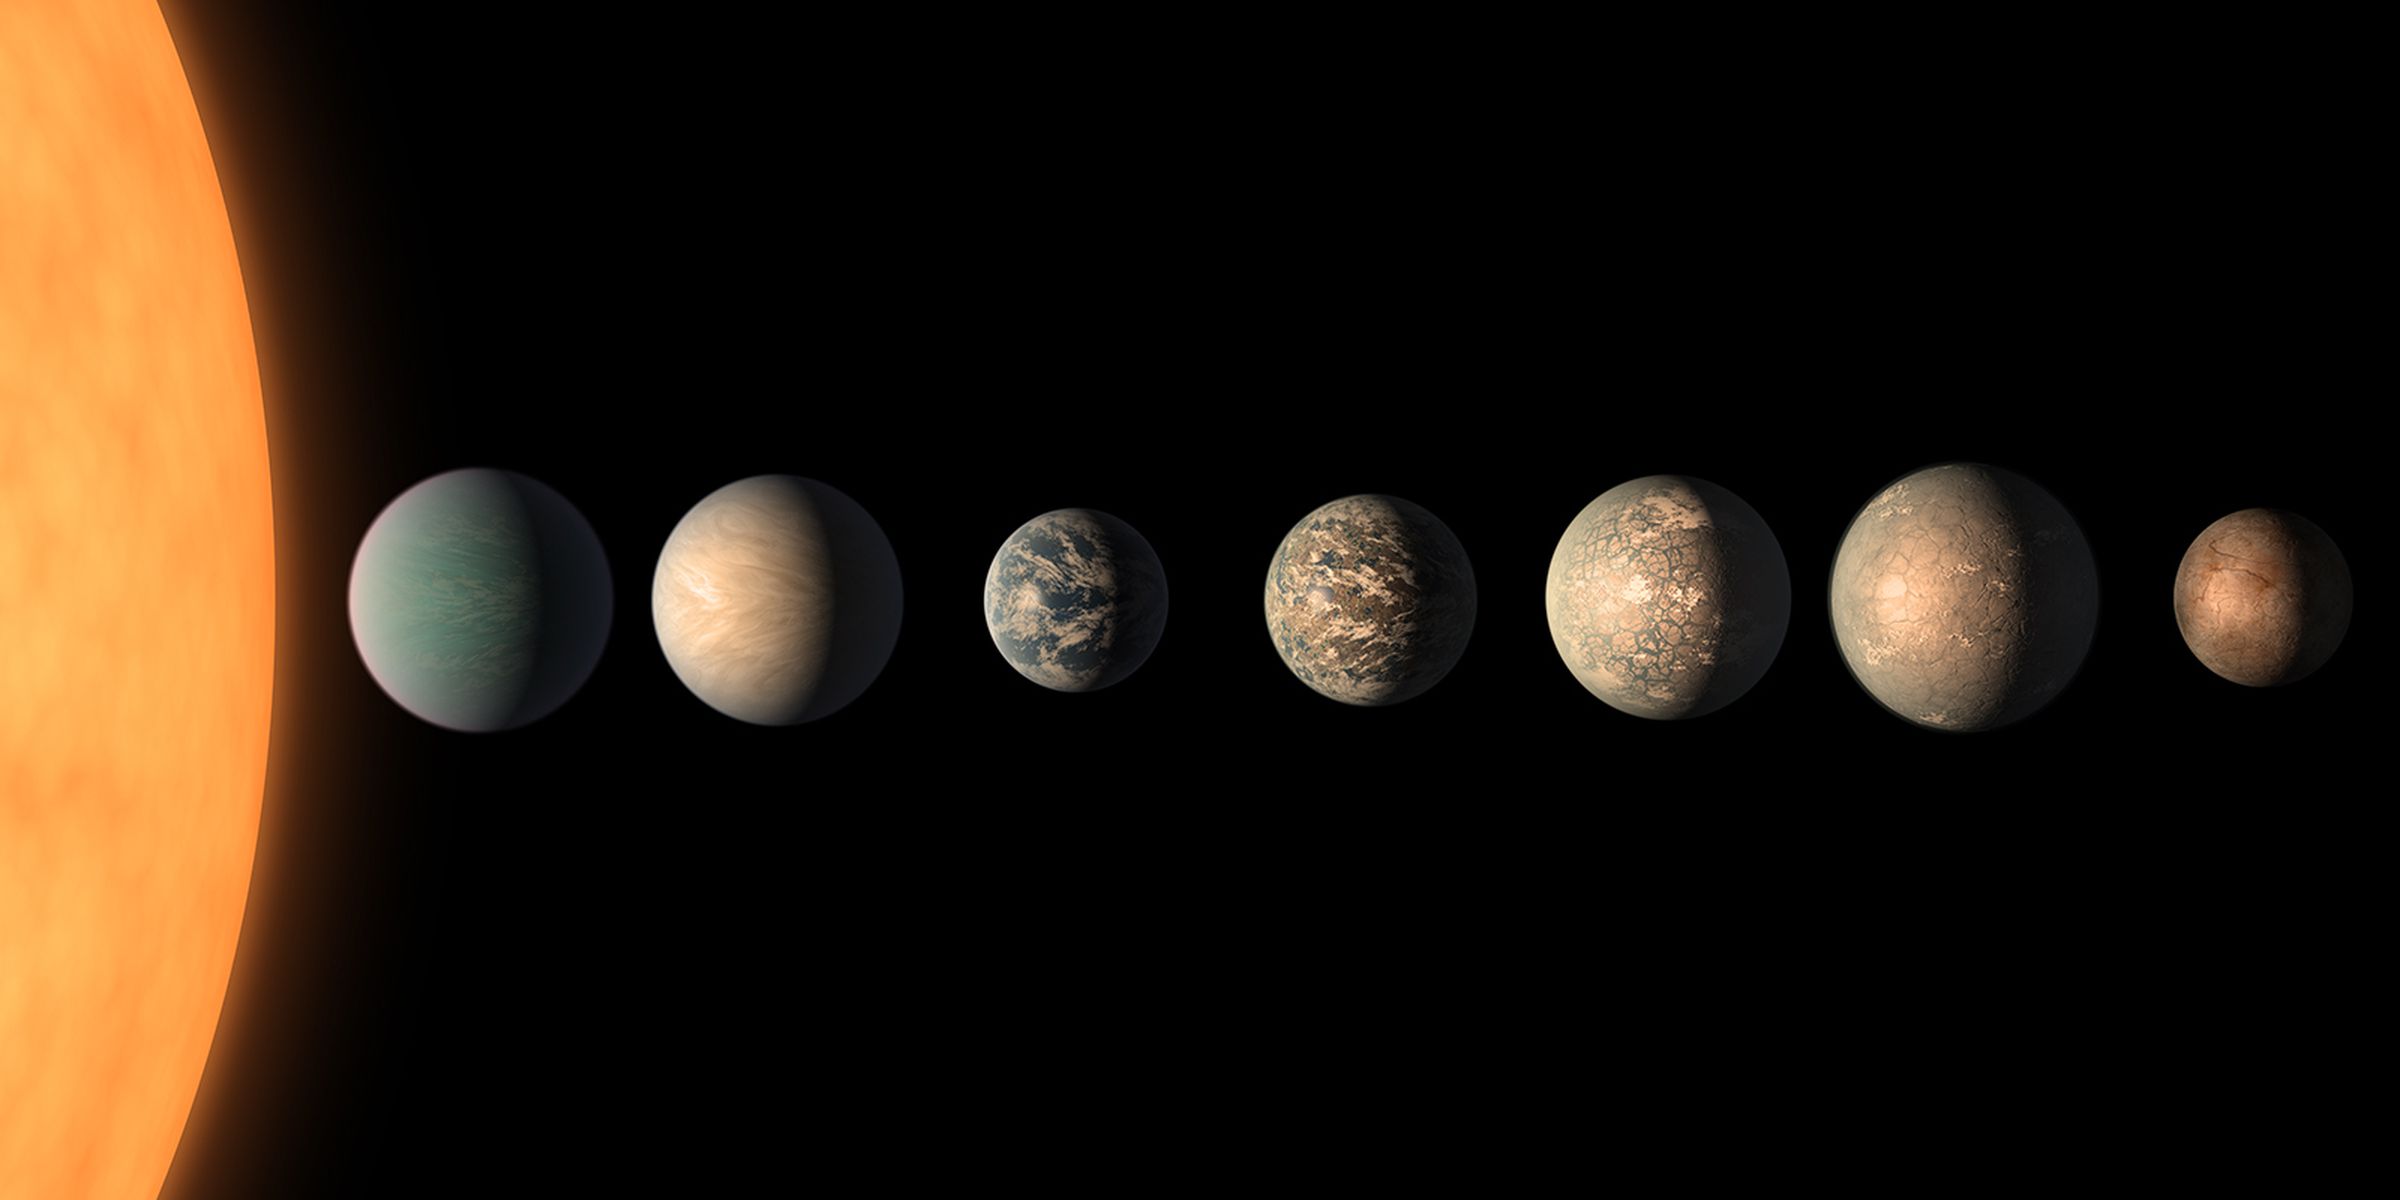 An artistic illustration of what the planets in the TRAPPIST-1 system could look like.